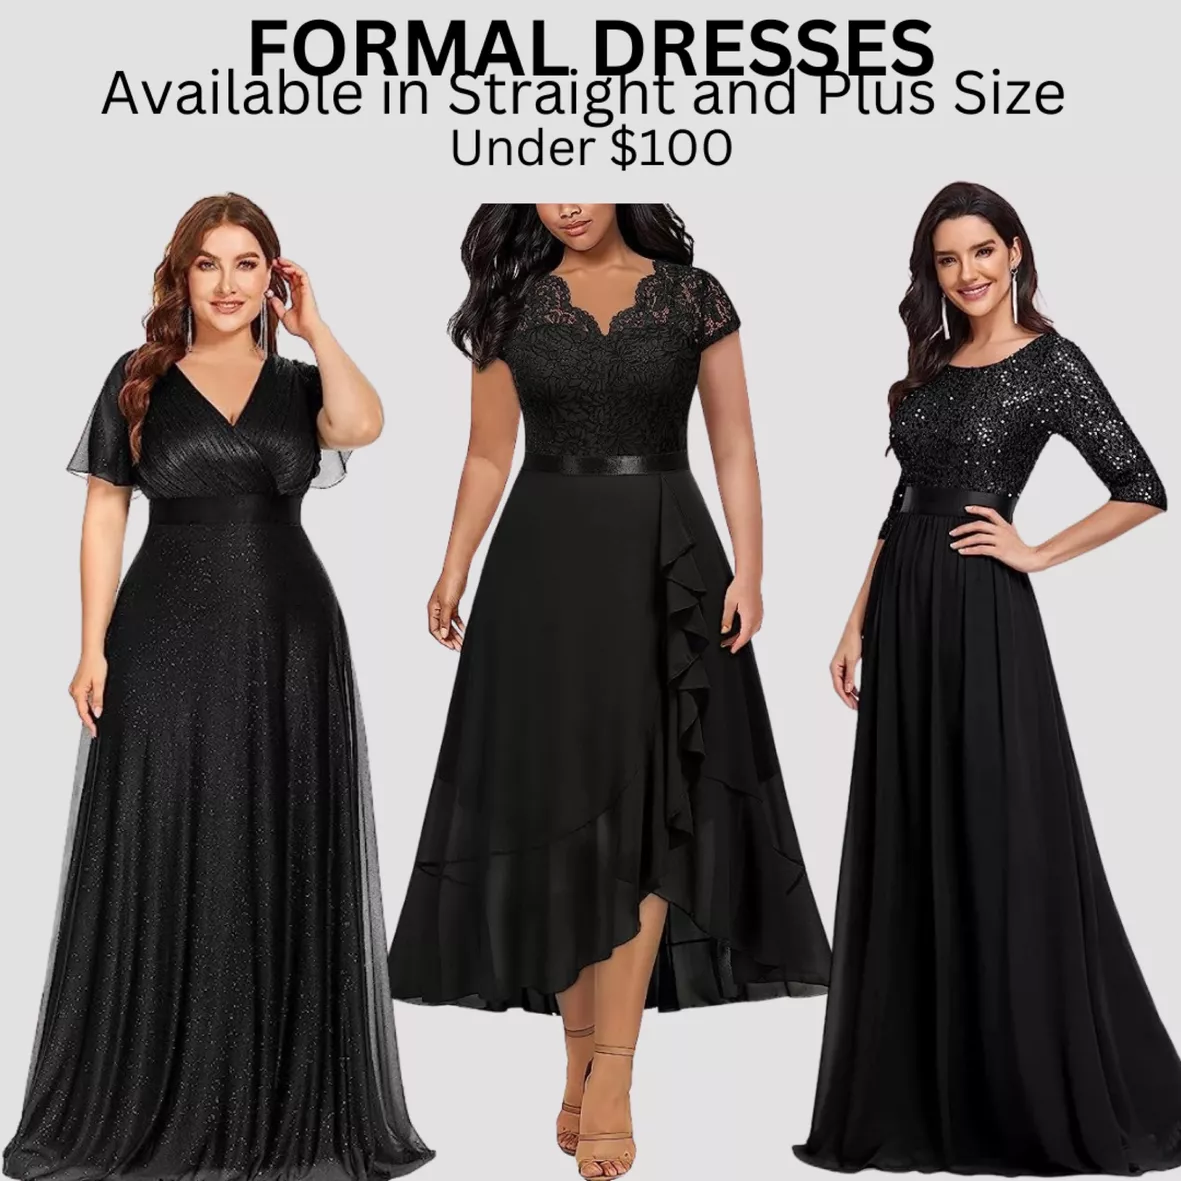 Plus Size Dresses  Gorgeous Plus Size Outfits for all Occasions